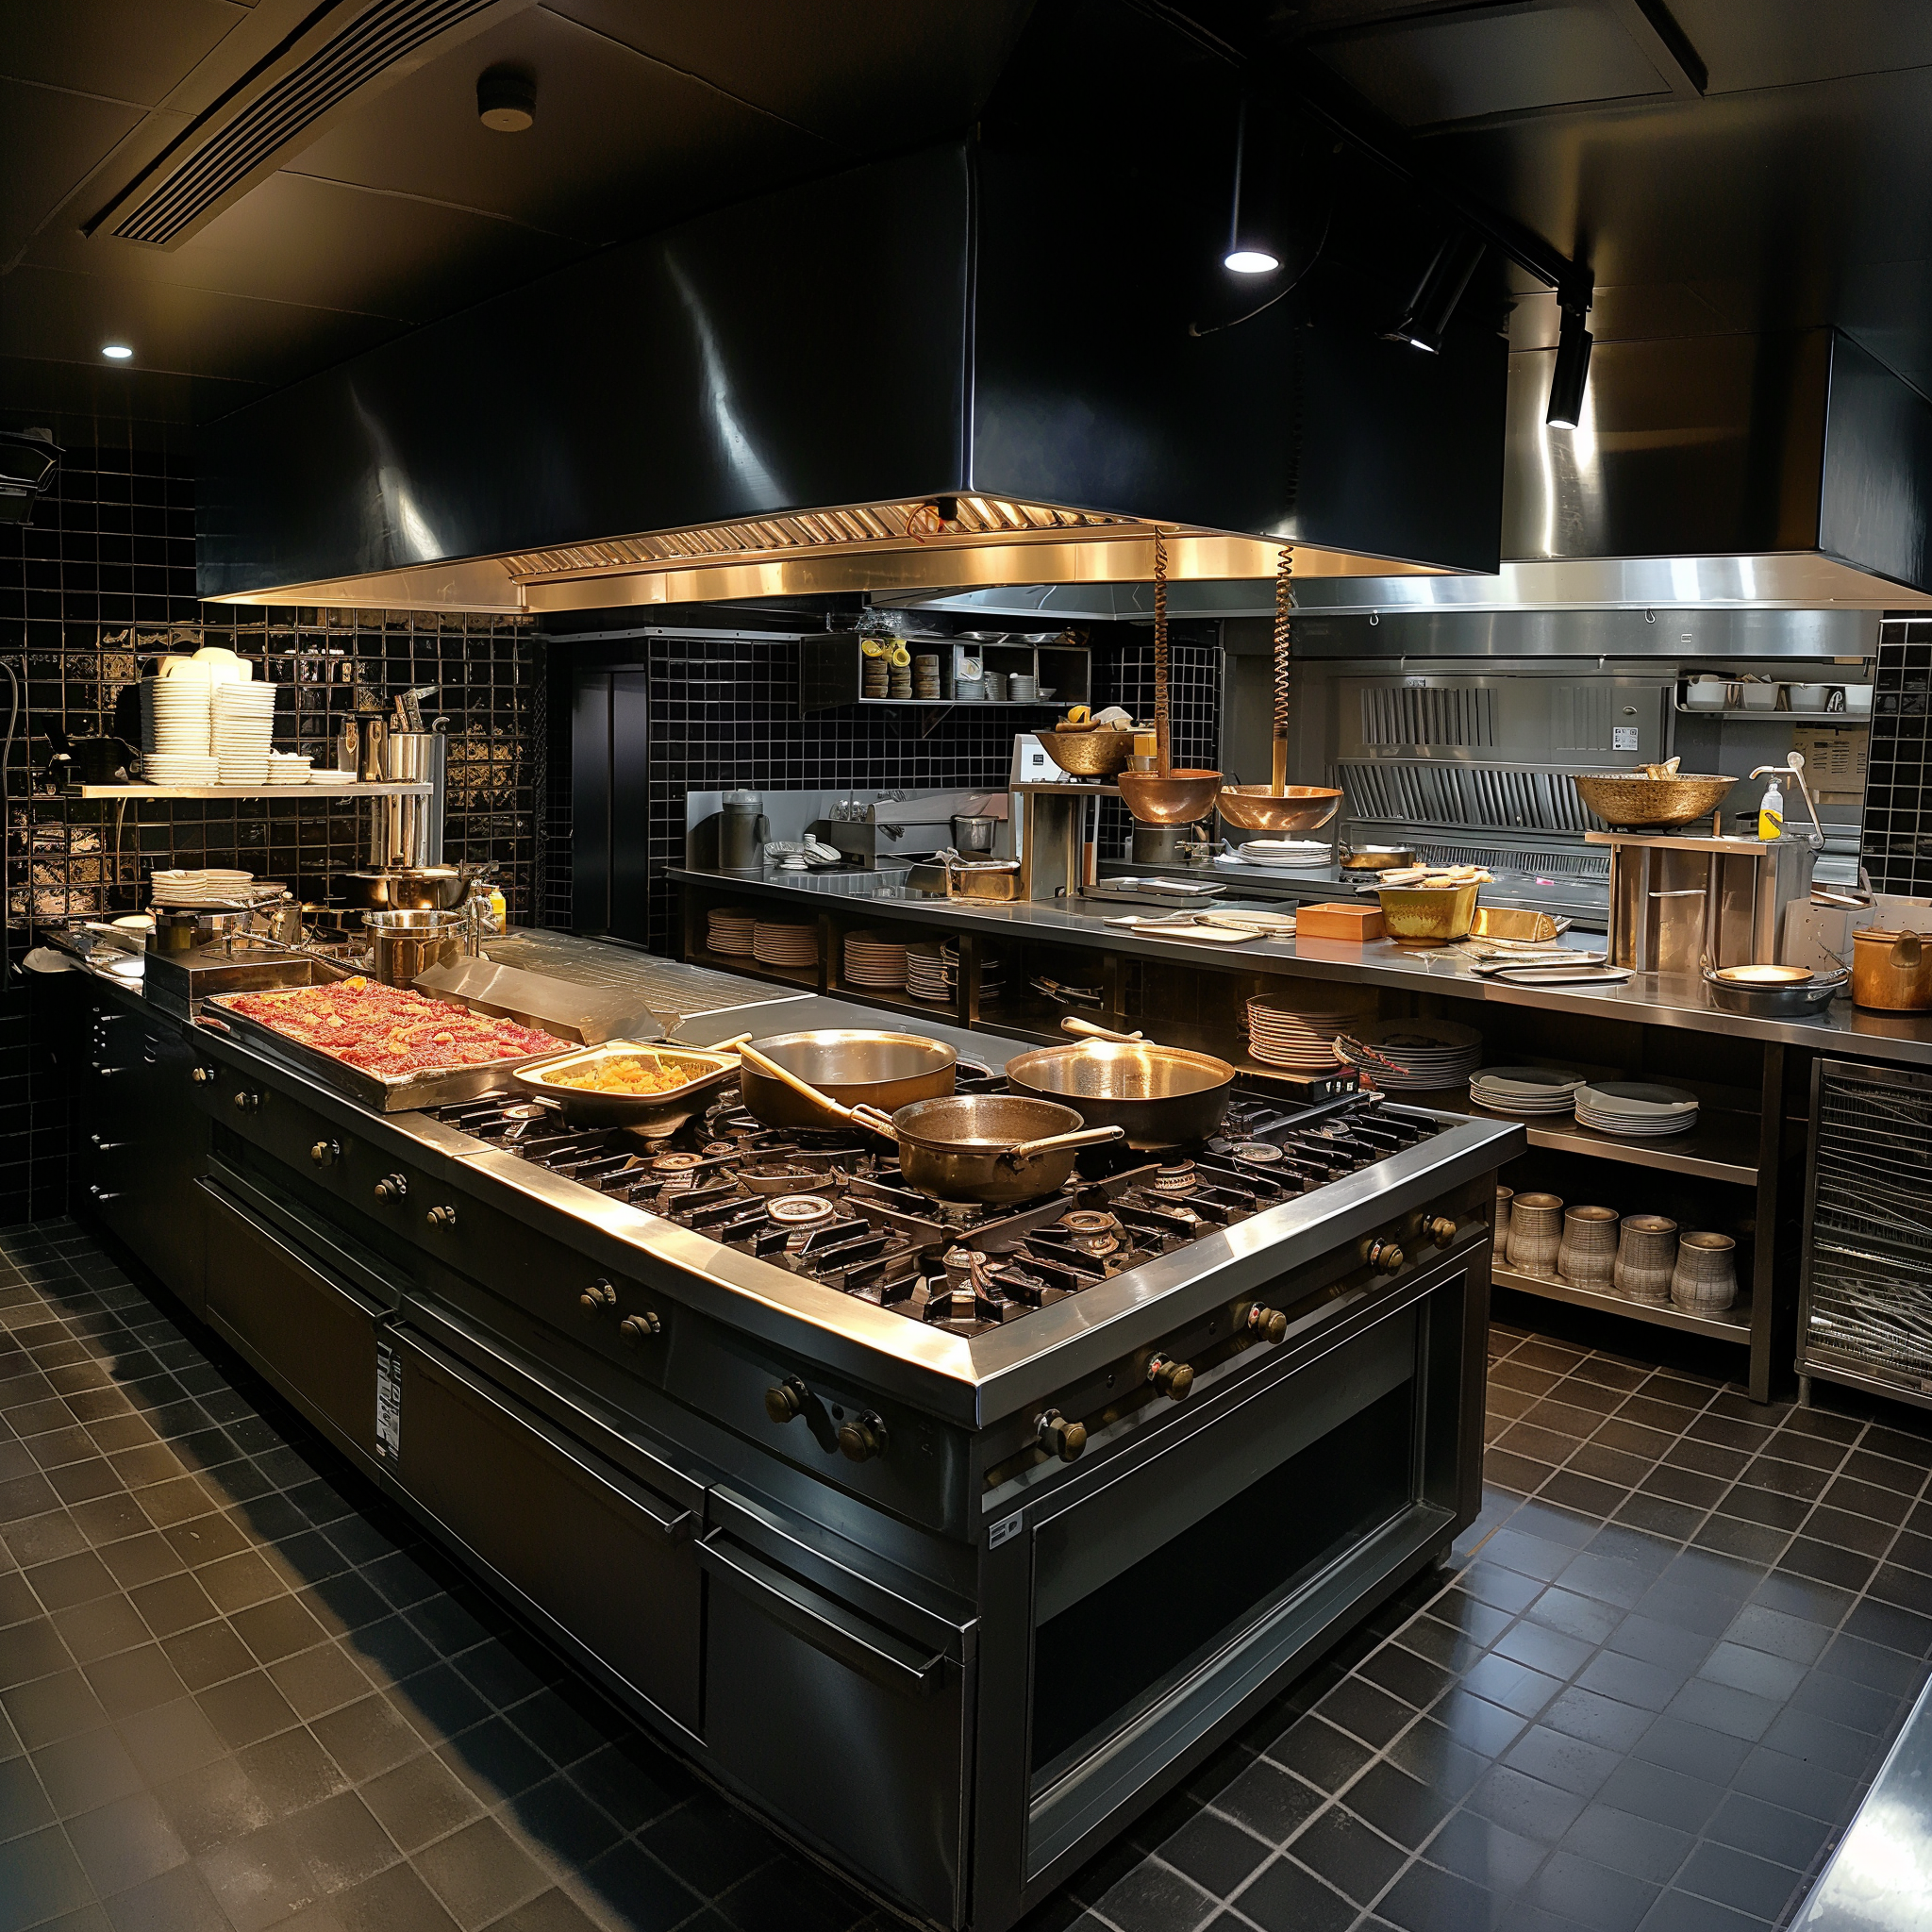 Complete Guide: What Equipment Do I Need for My Restaurant Kitchen?